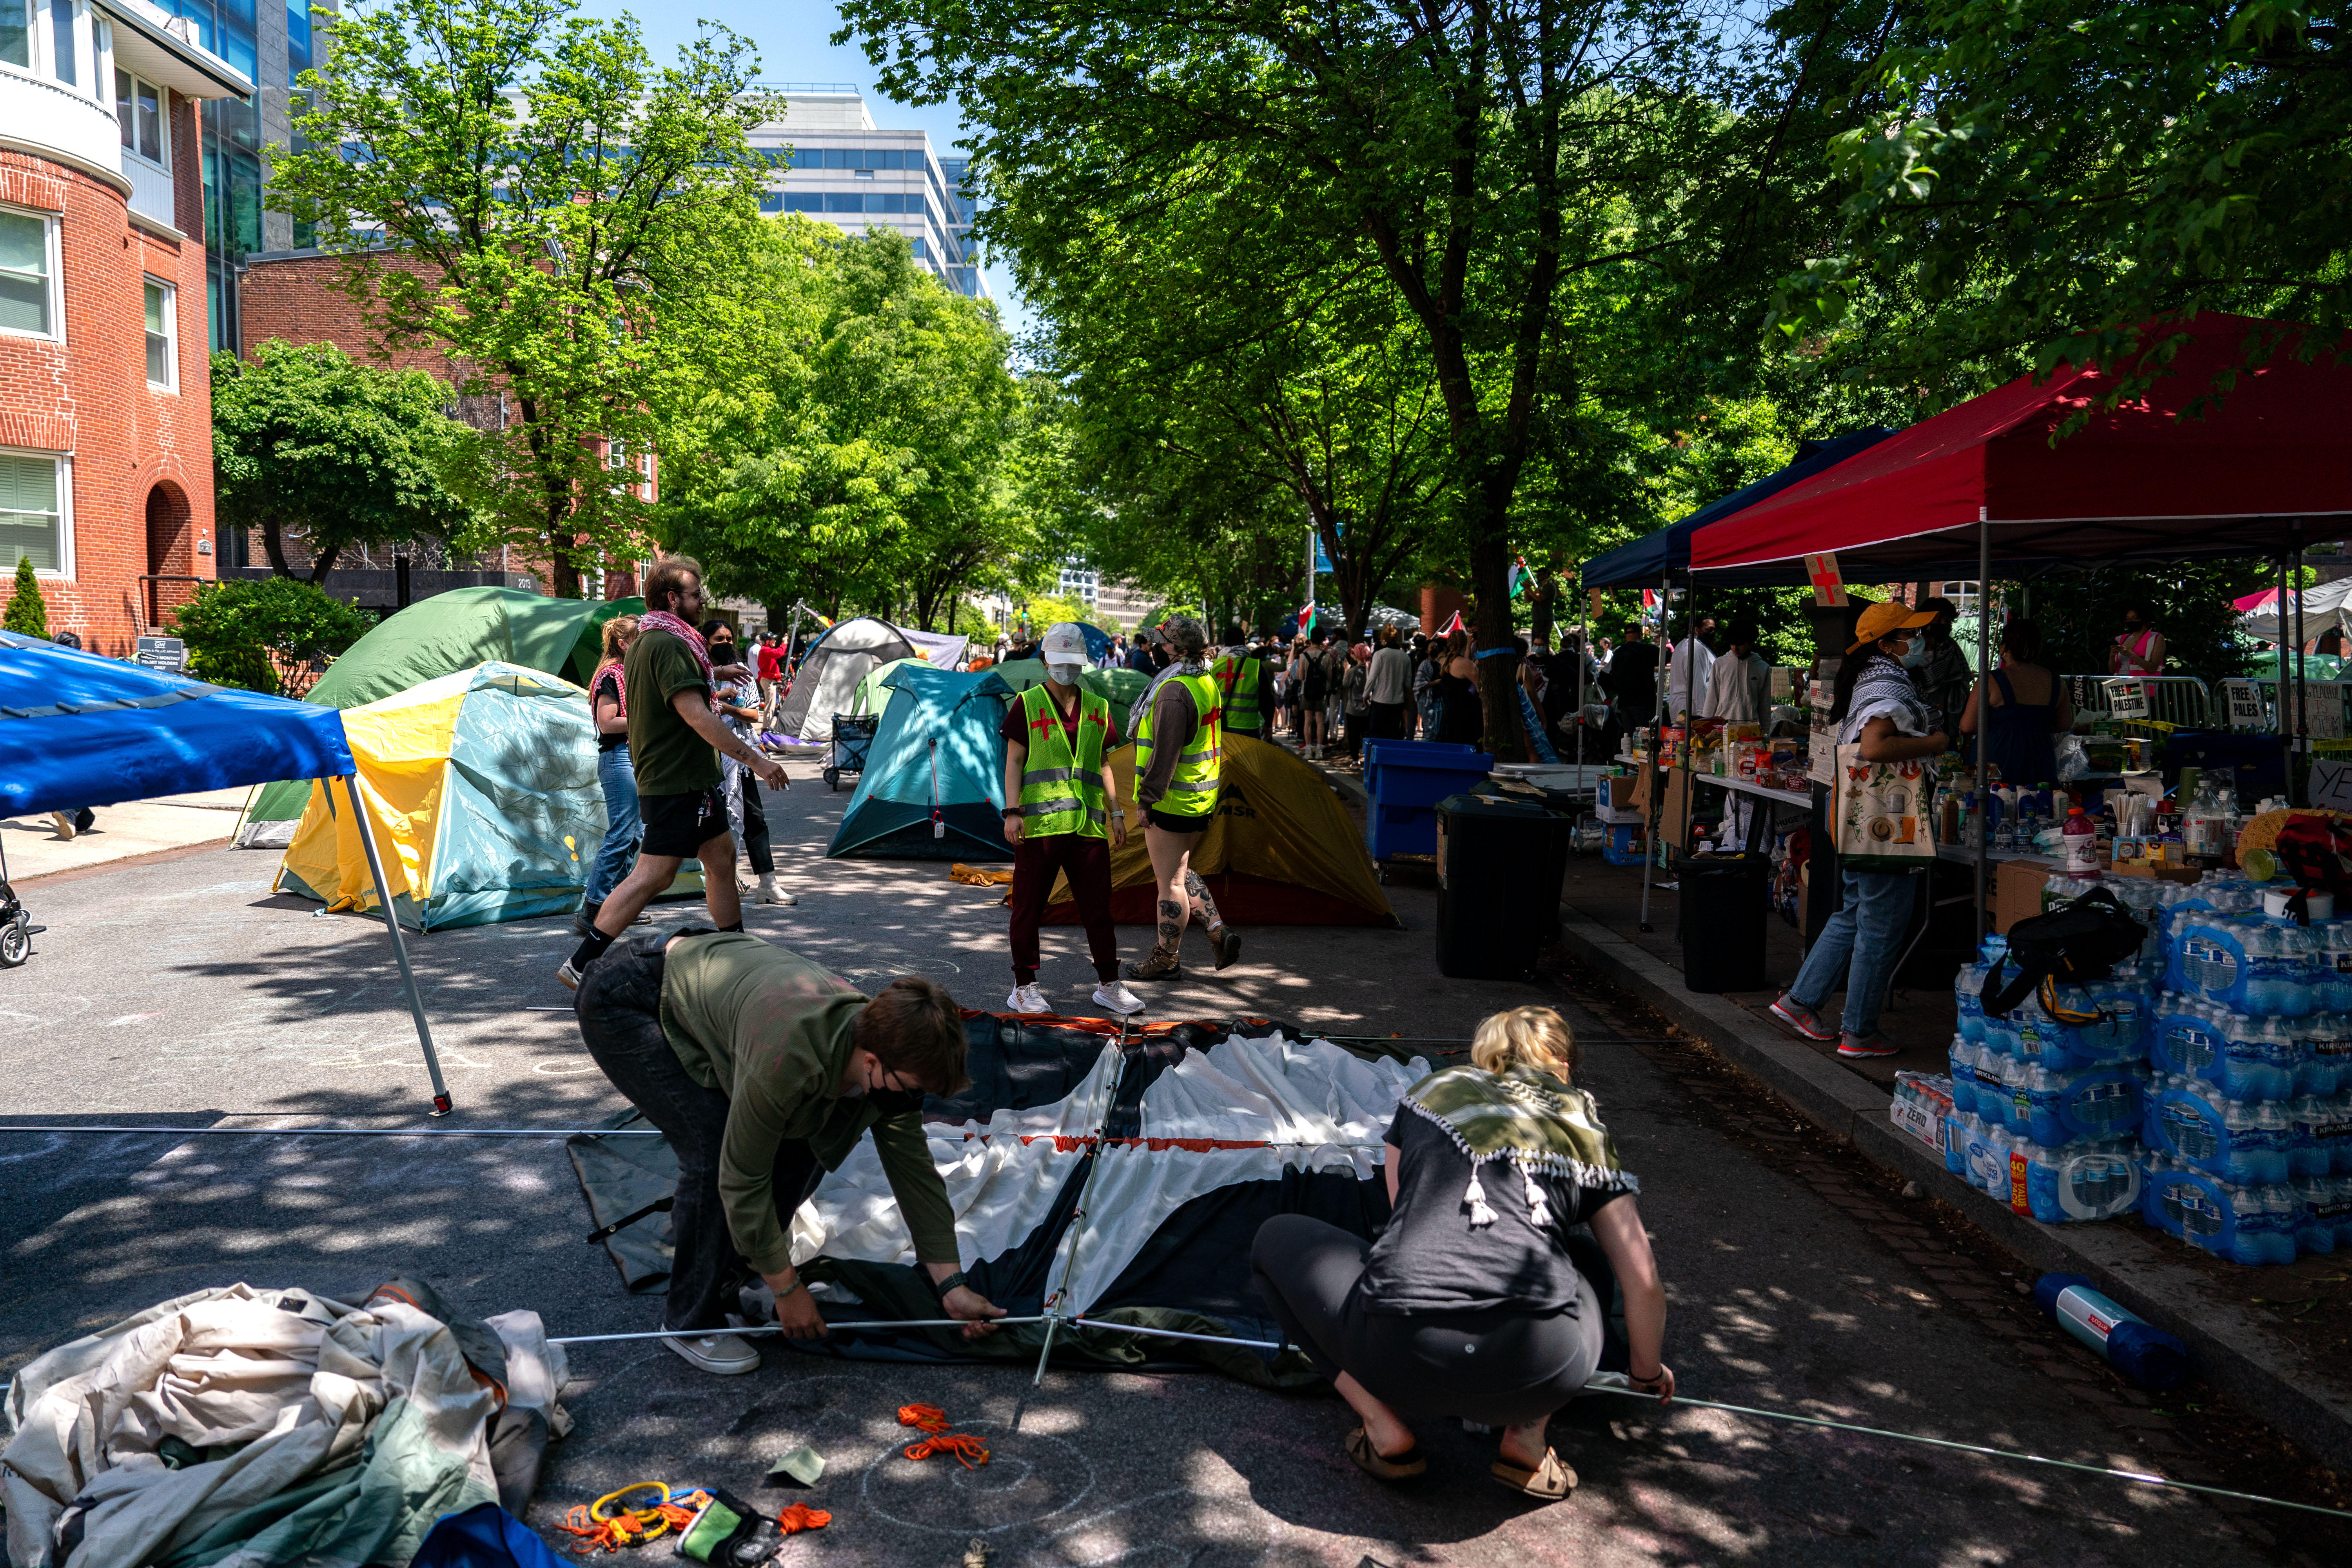 People set up more tents along H street as they protest at George Washington University in Washington, DC, on April 28.